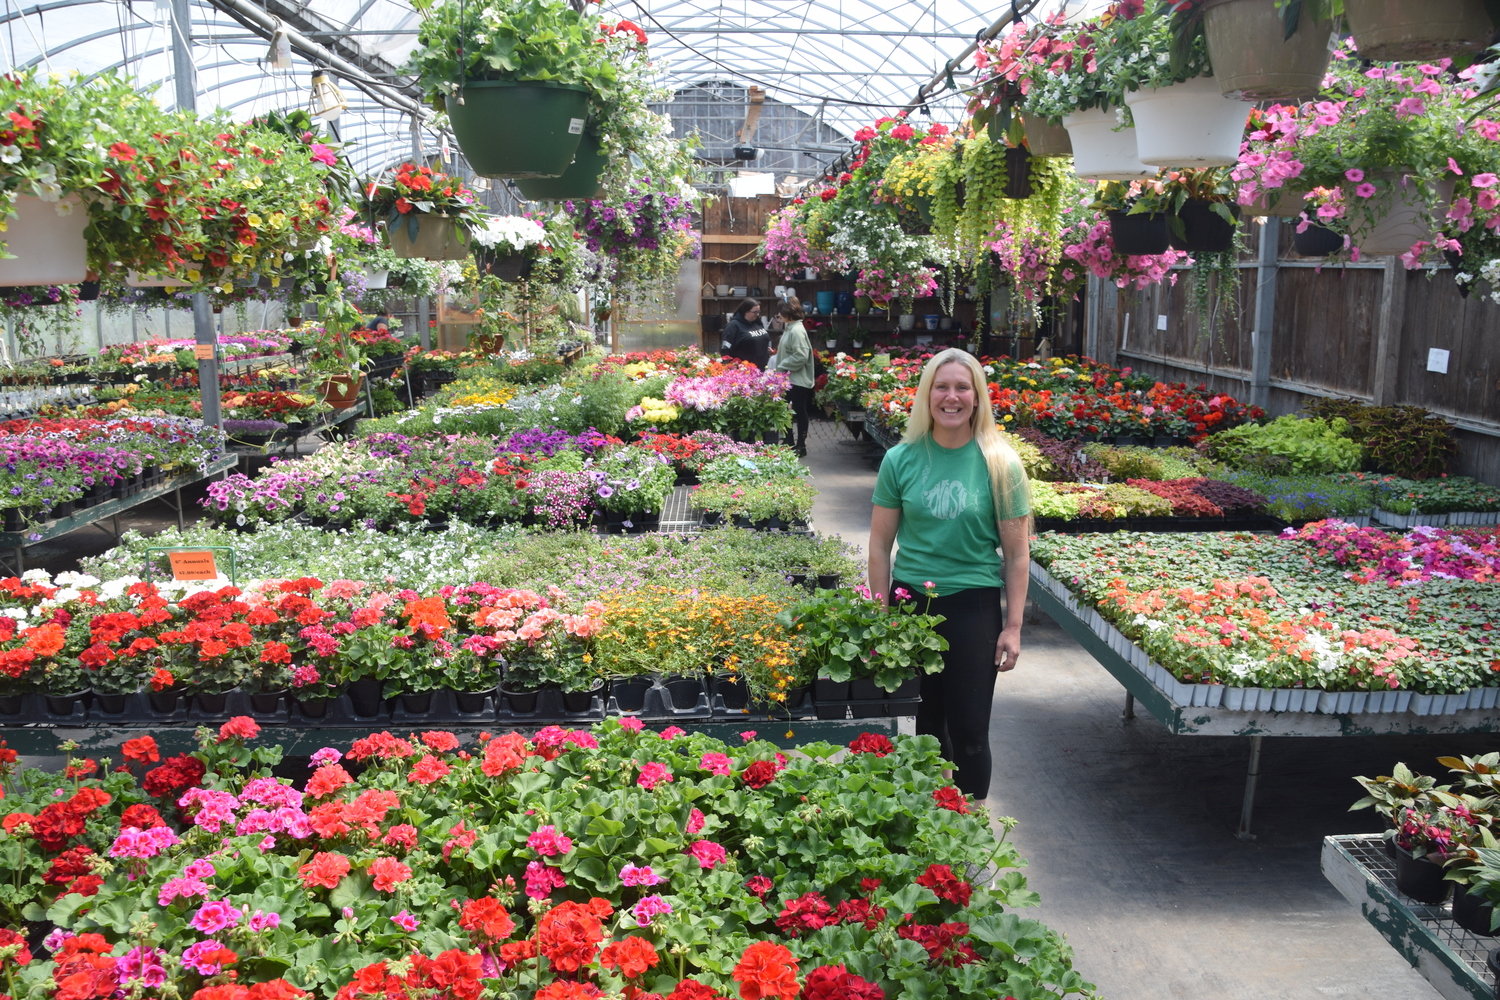 Stephanie Miller stands inside the main greenhouse at Adirondack Greenhouses.